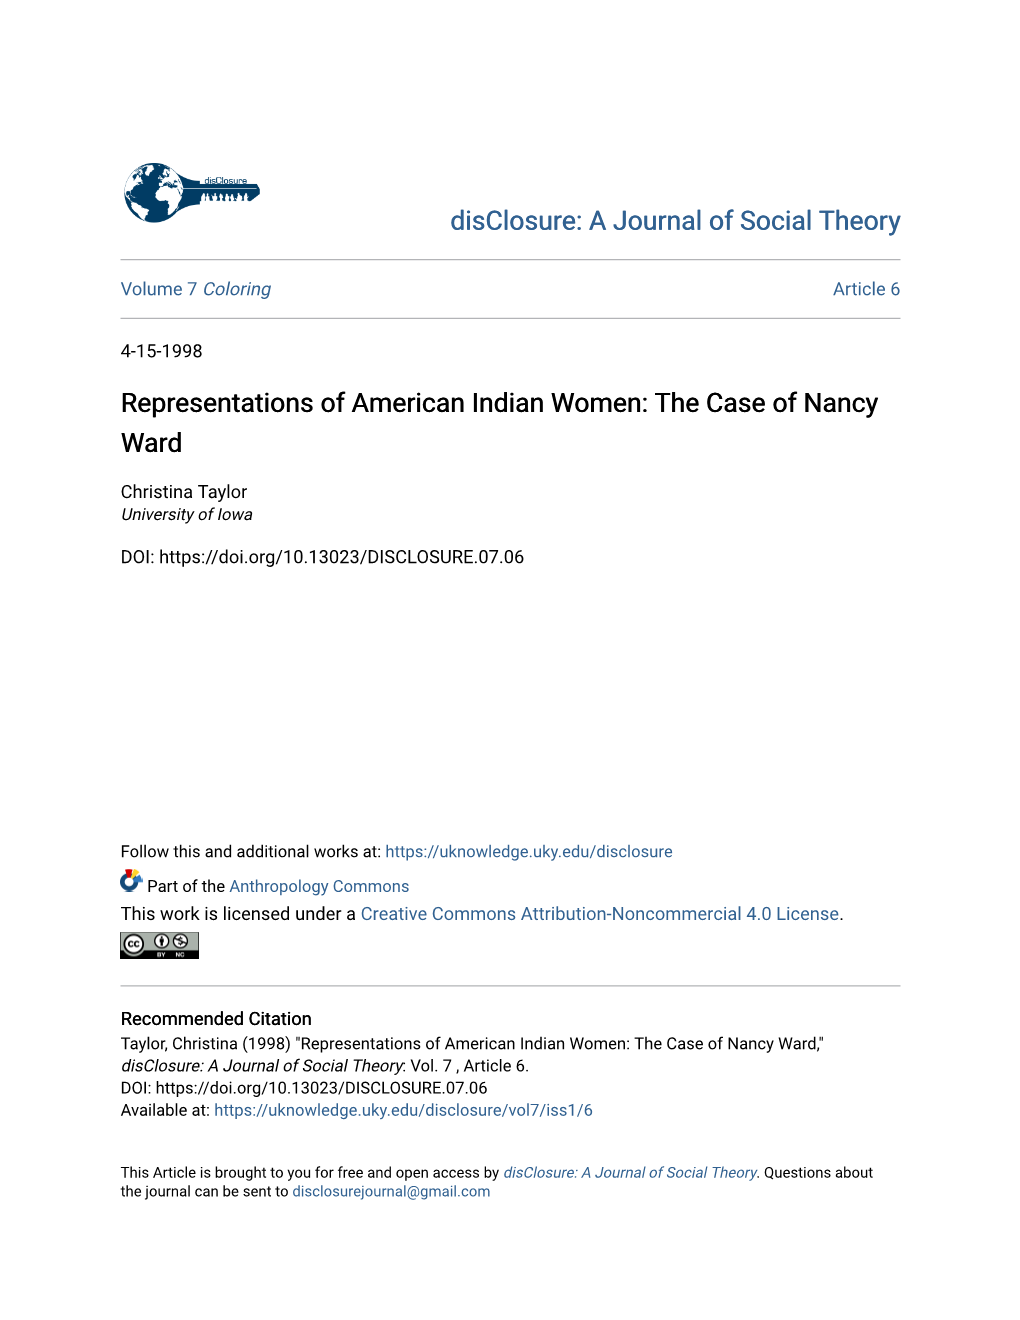 Representations of American Indian Women: the Case of Nancy Ward